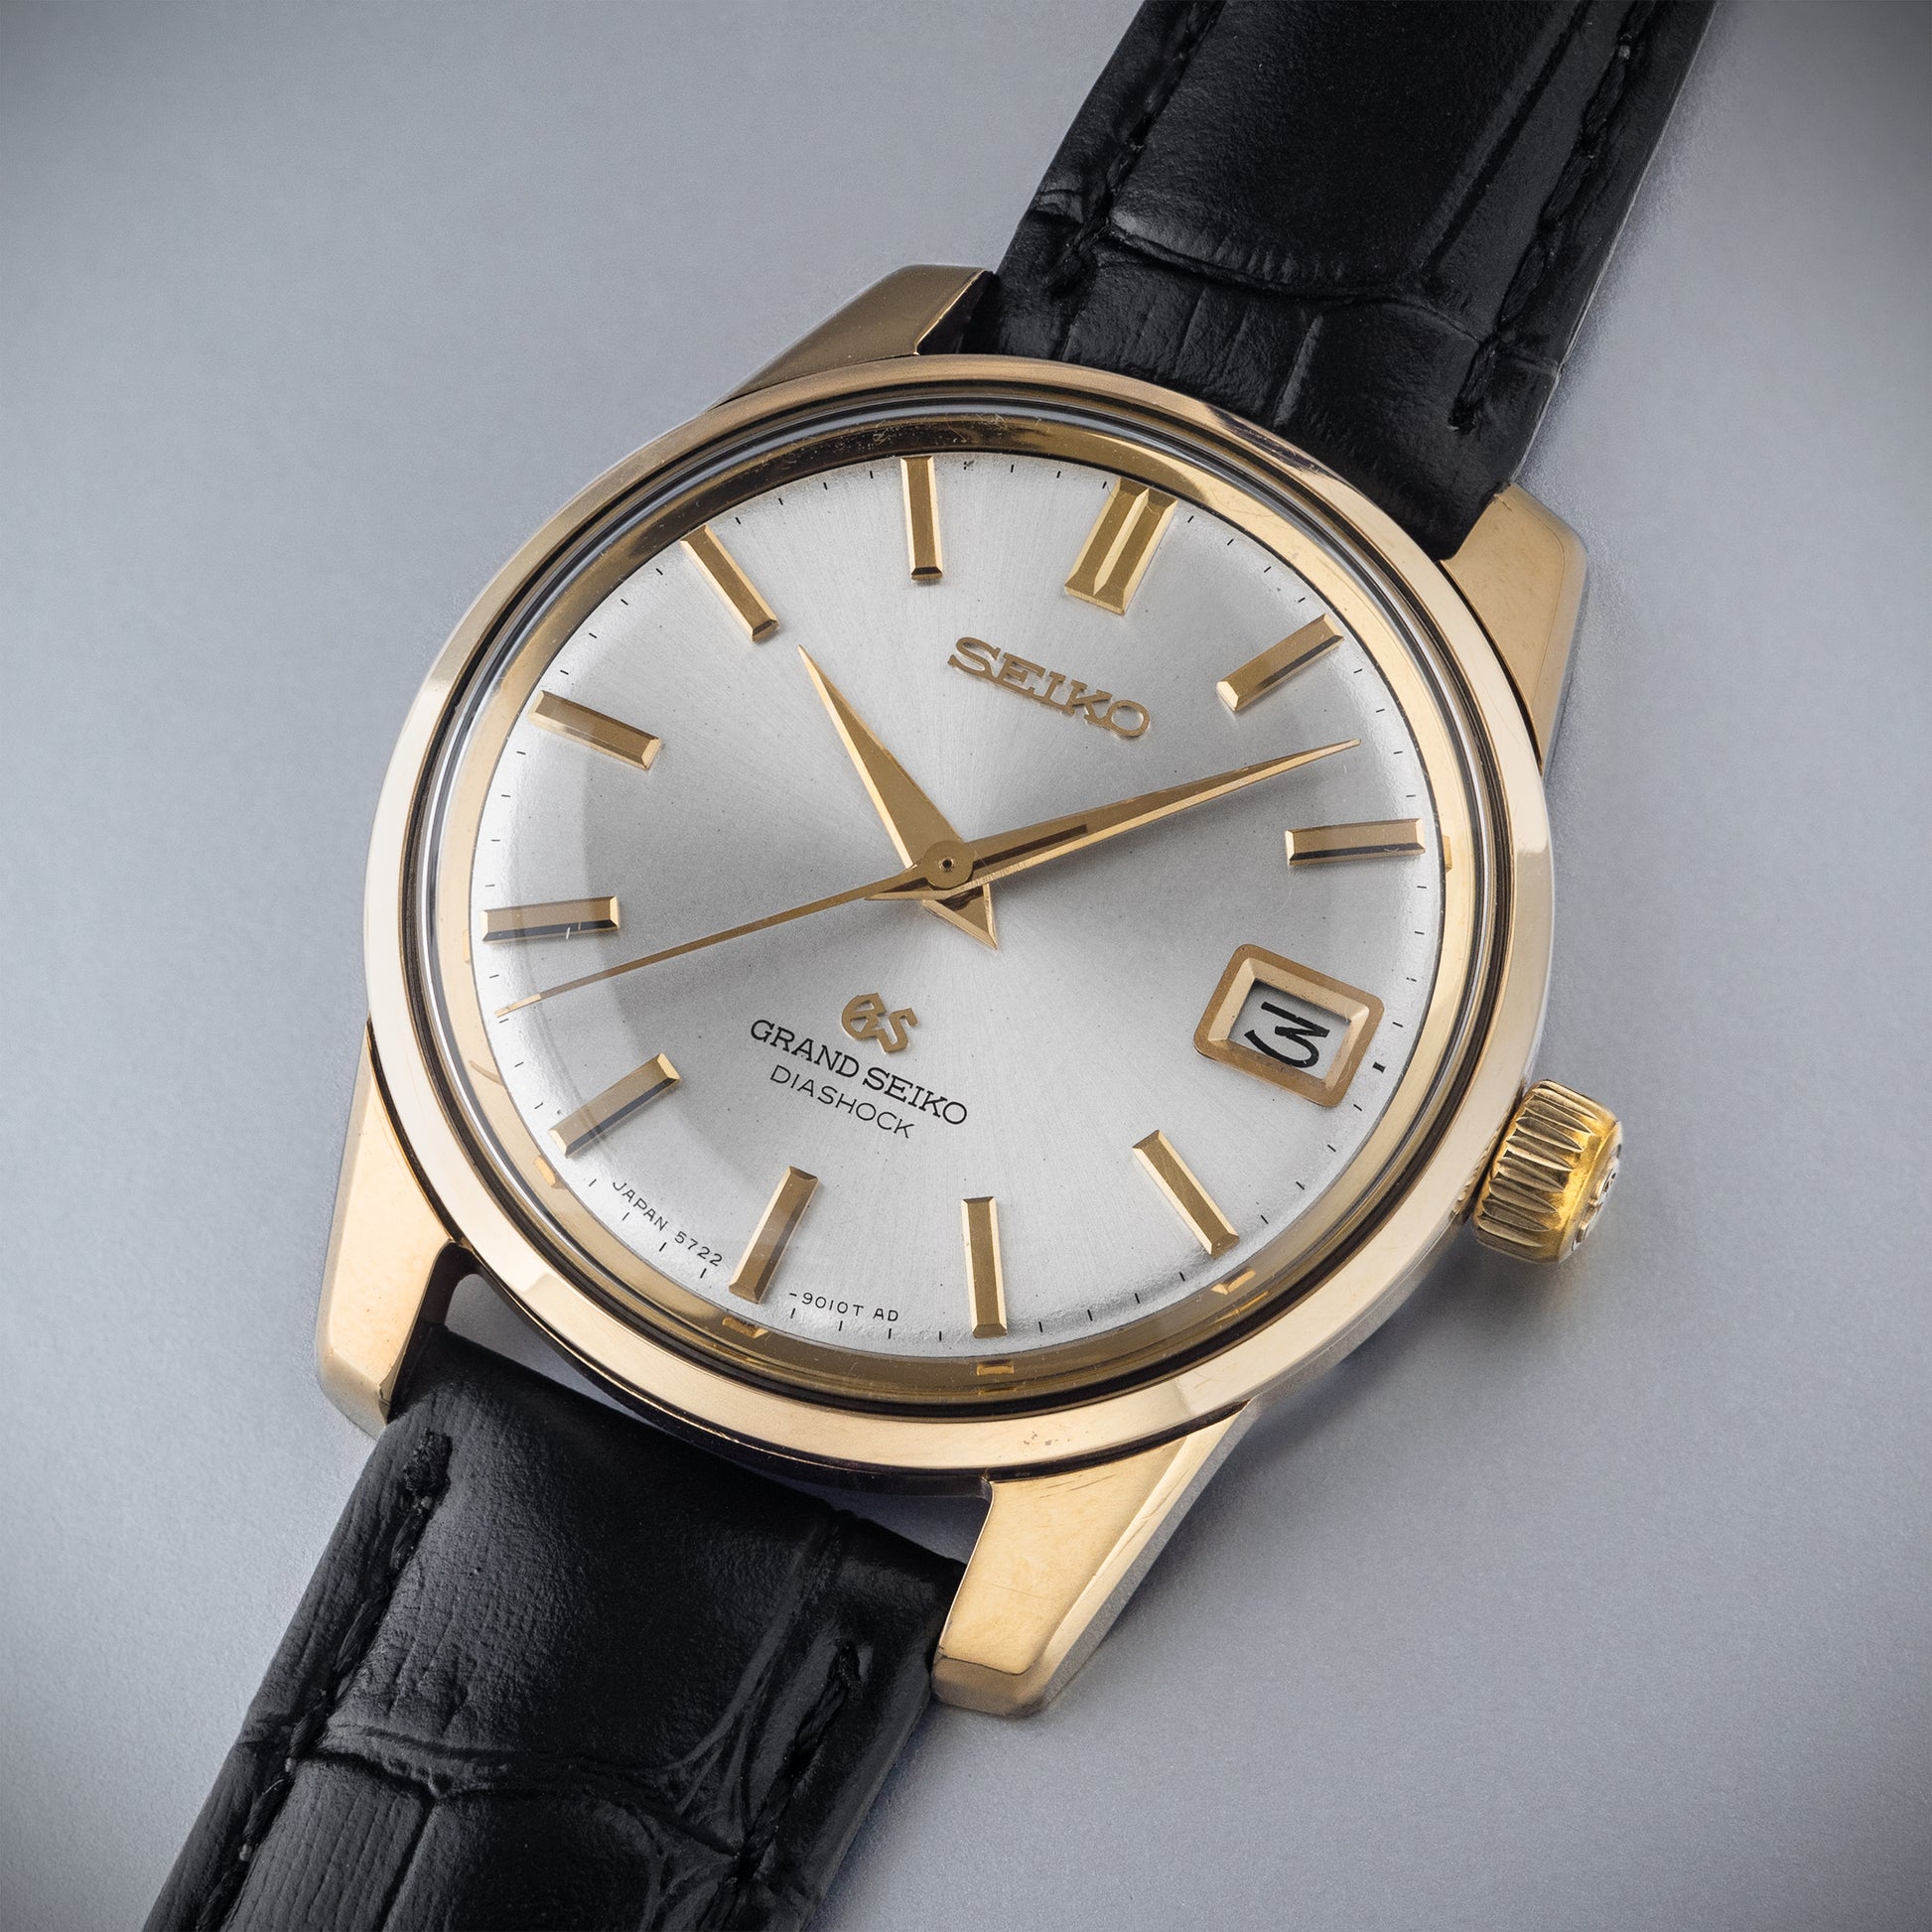 No. 867 / Grand Seiko 57GS - 1967 – From Time To Times